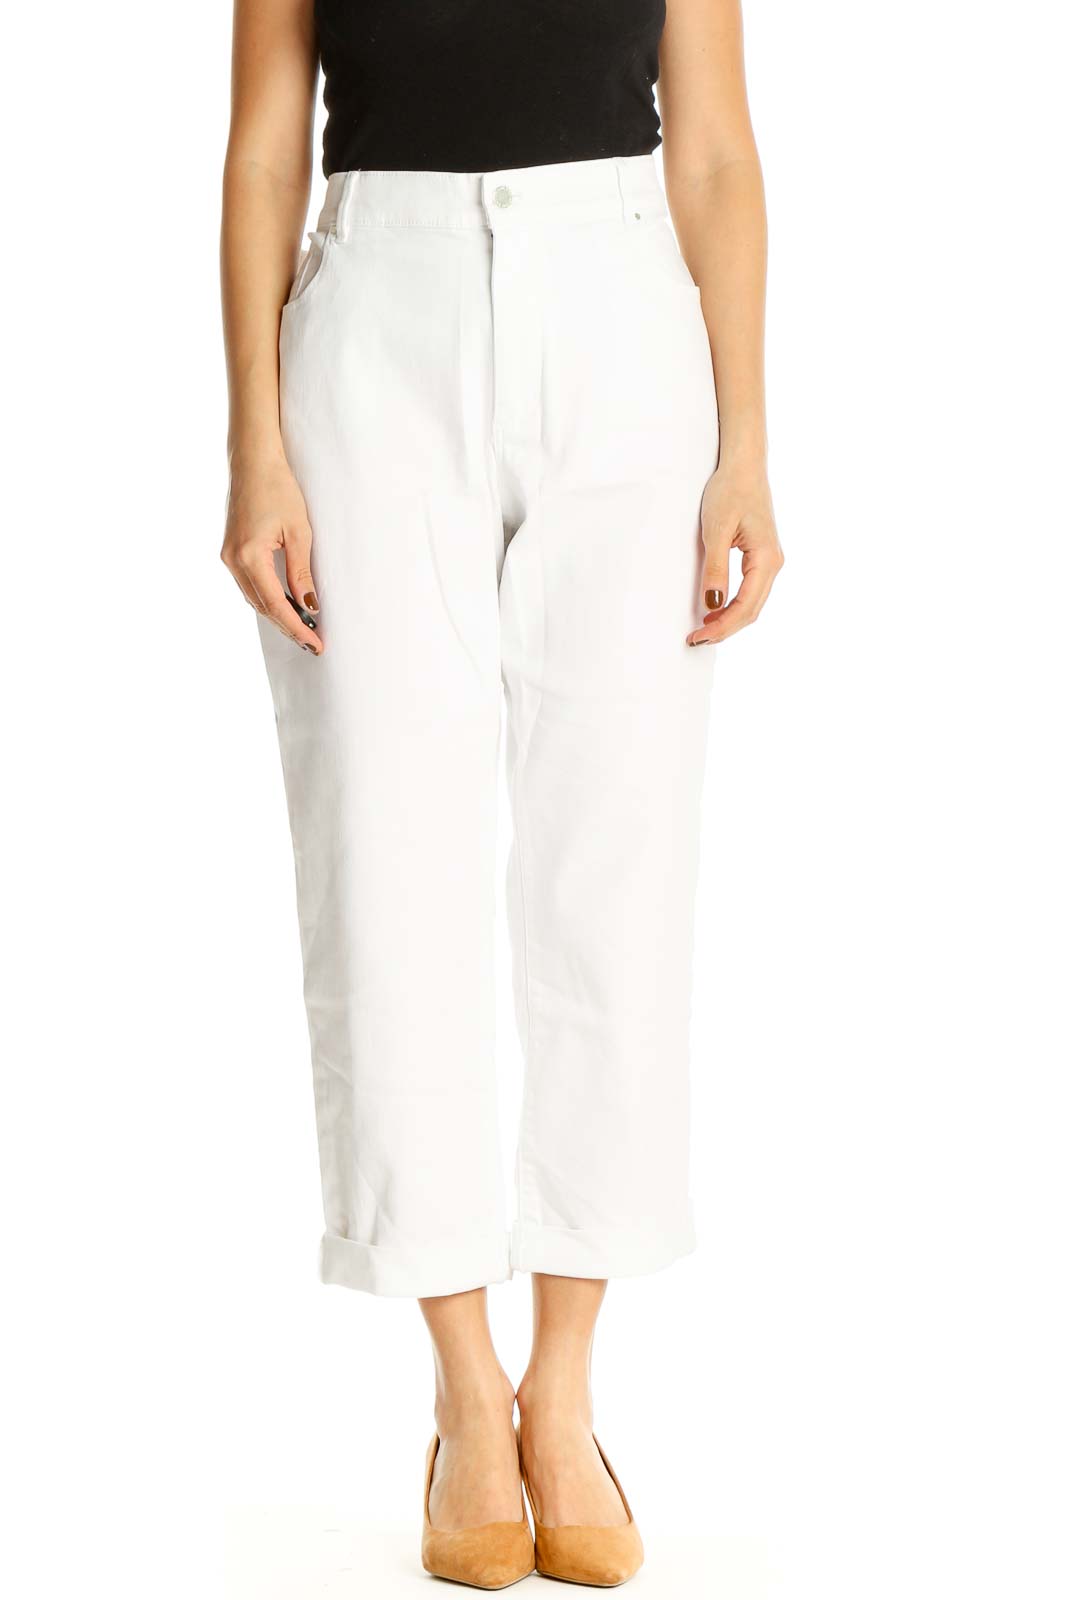 White Solid Casual Trousers Front